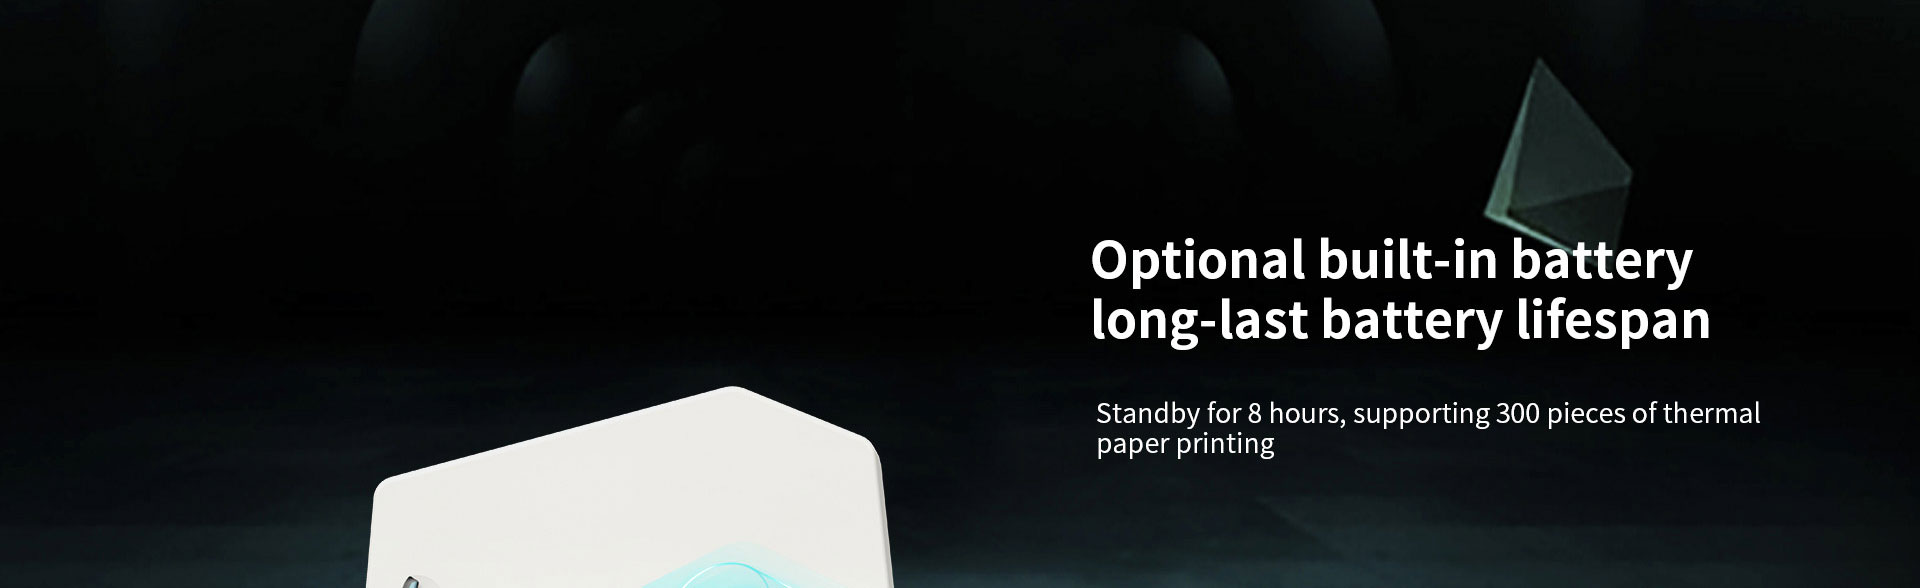 Android Smart Printer optional built-in battery